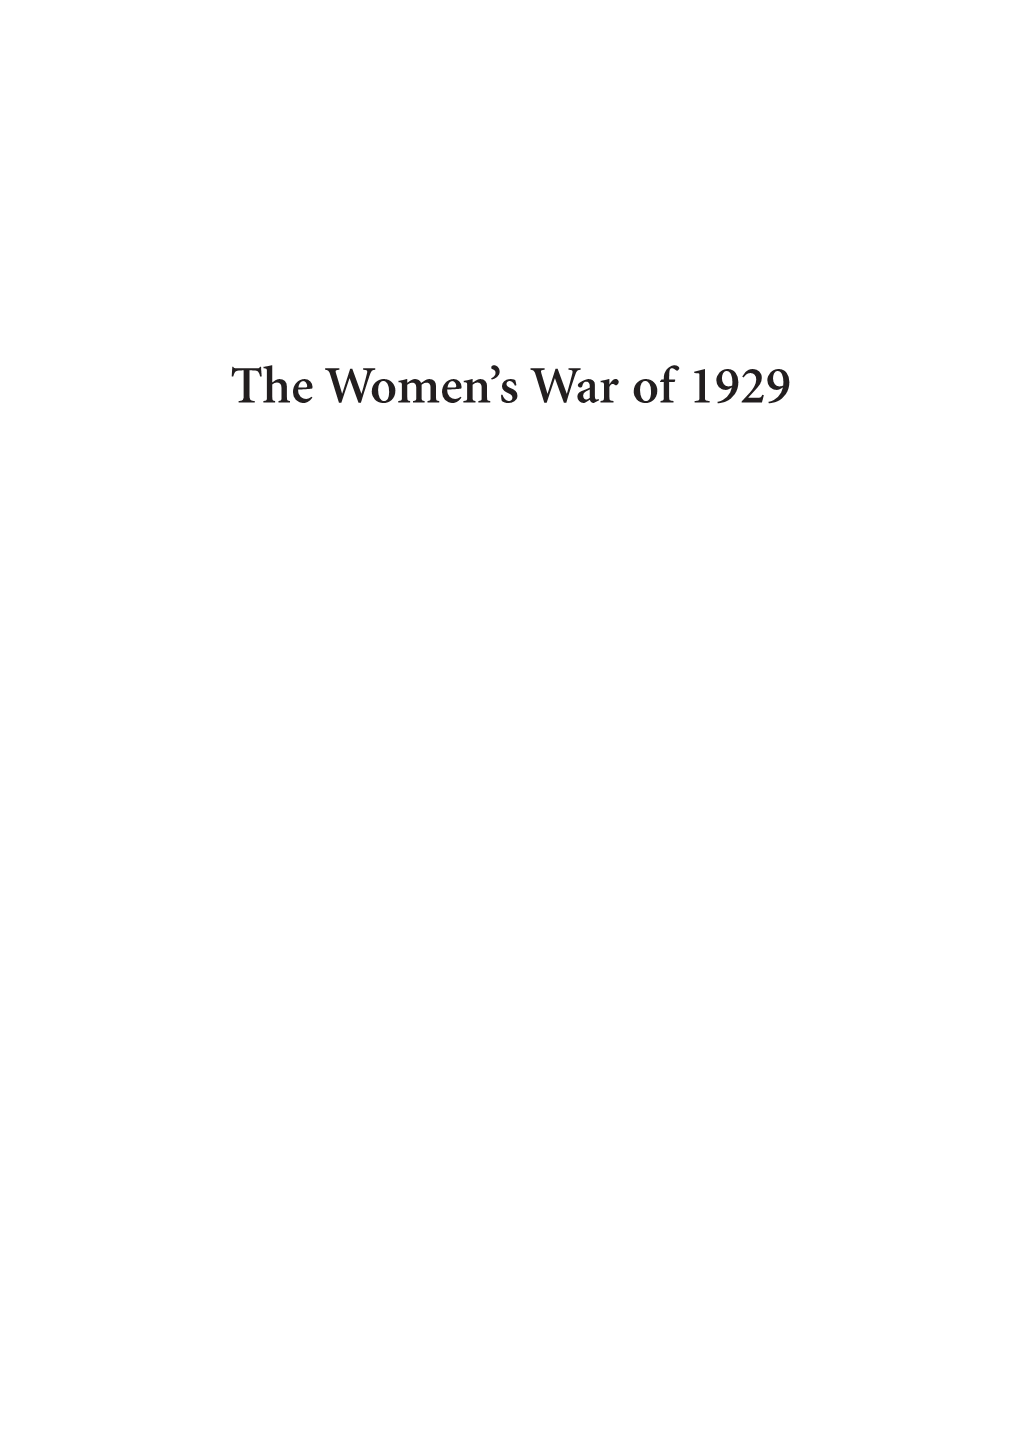 The Women's War of 1929 : a History of Anti-Colonial Resistance in Eastern Nigeria / Toyin Falola and Adam Paddock